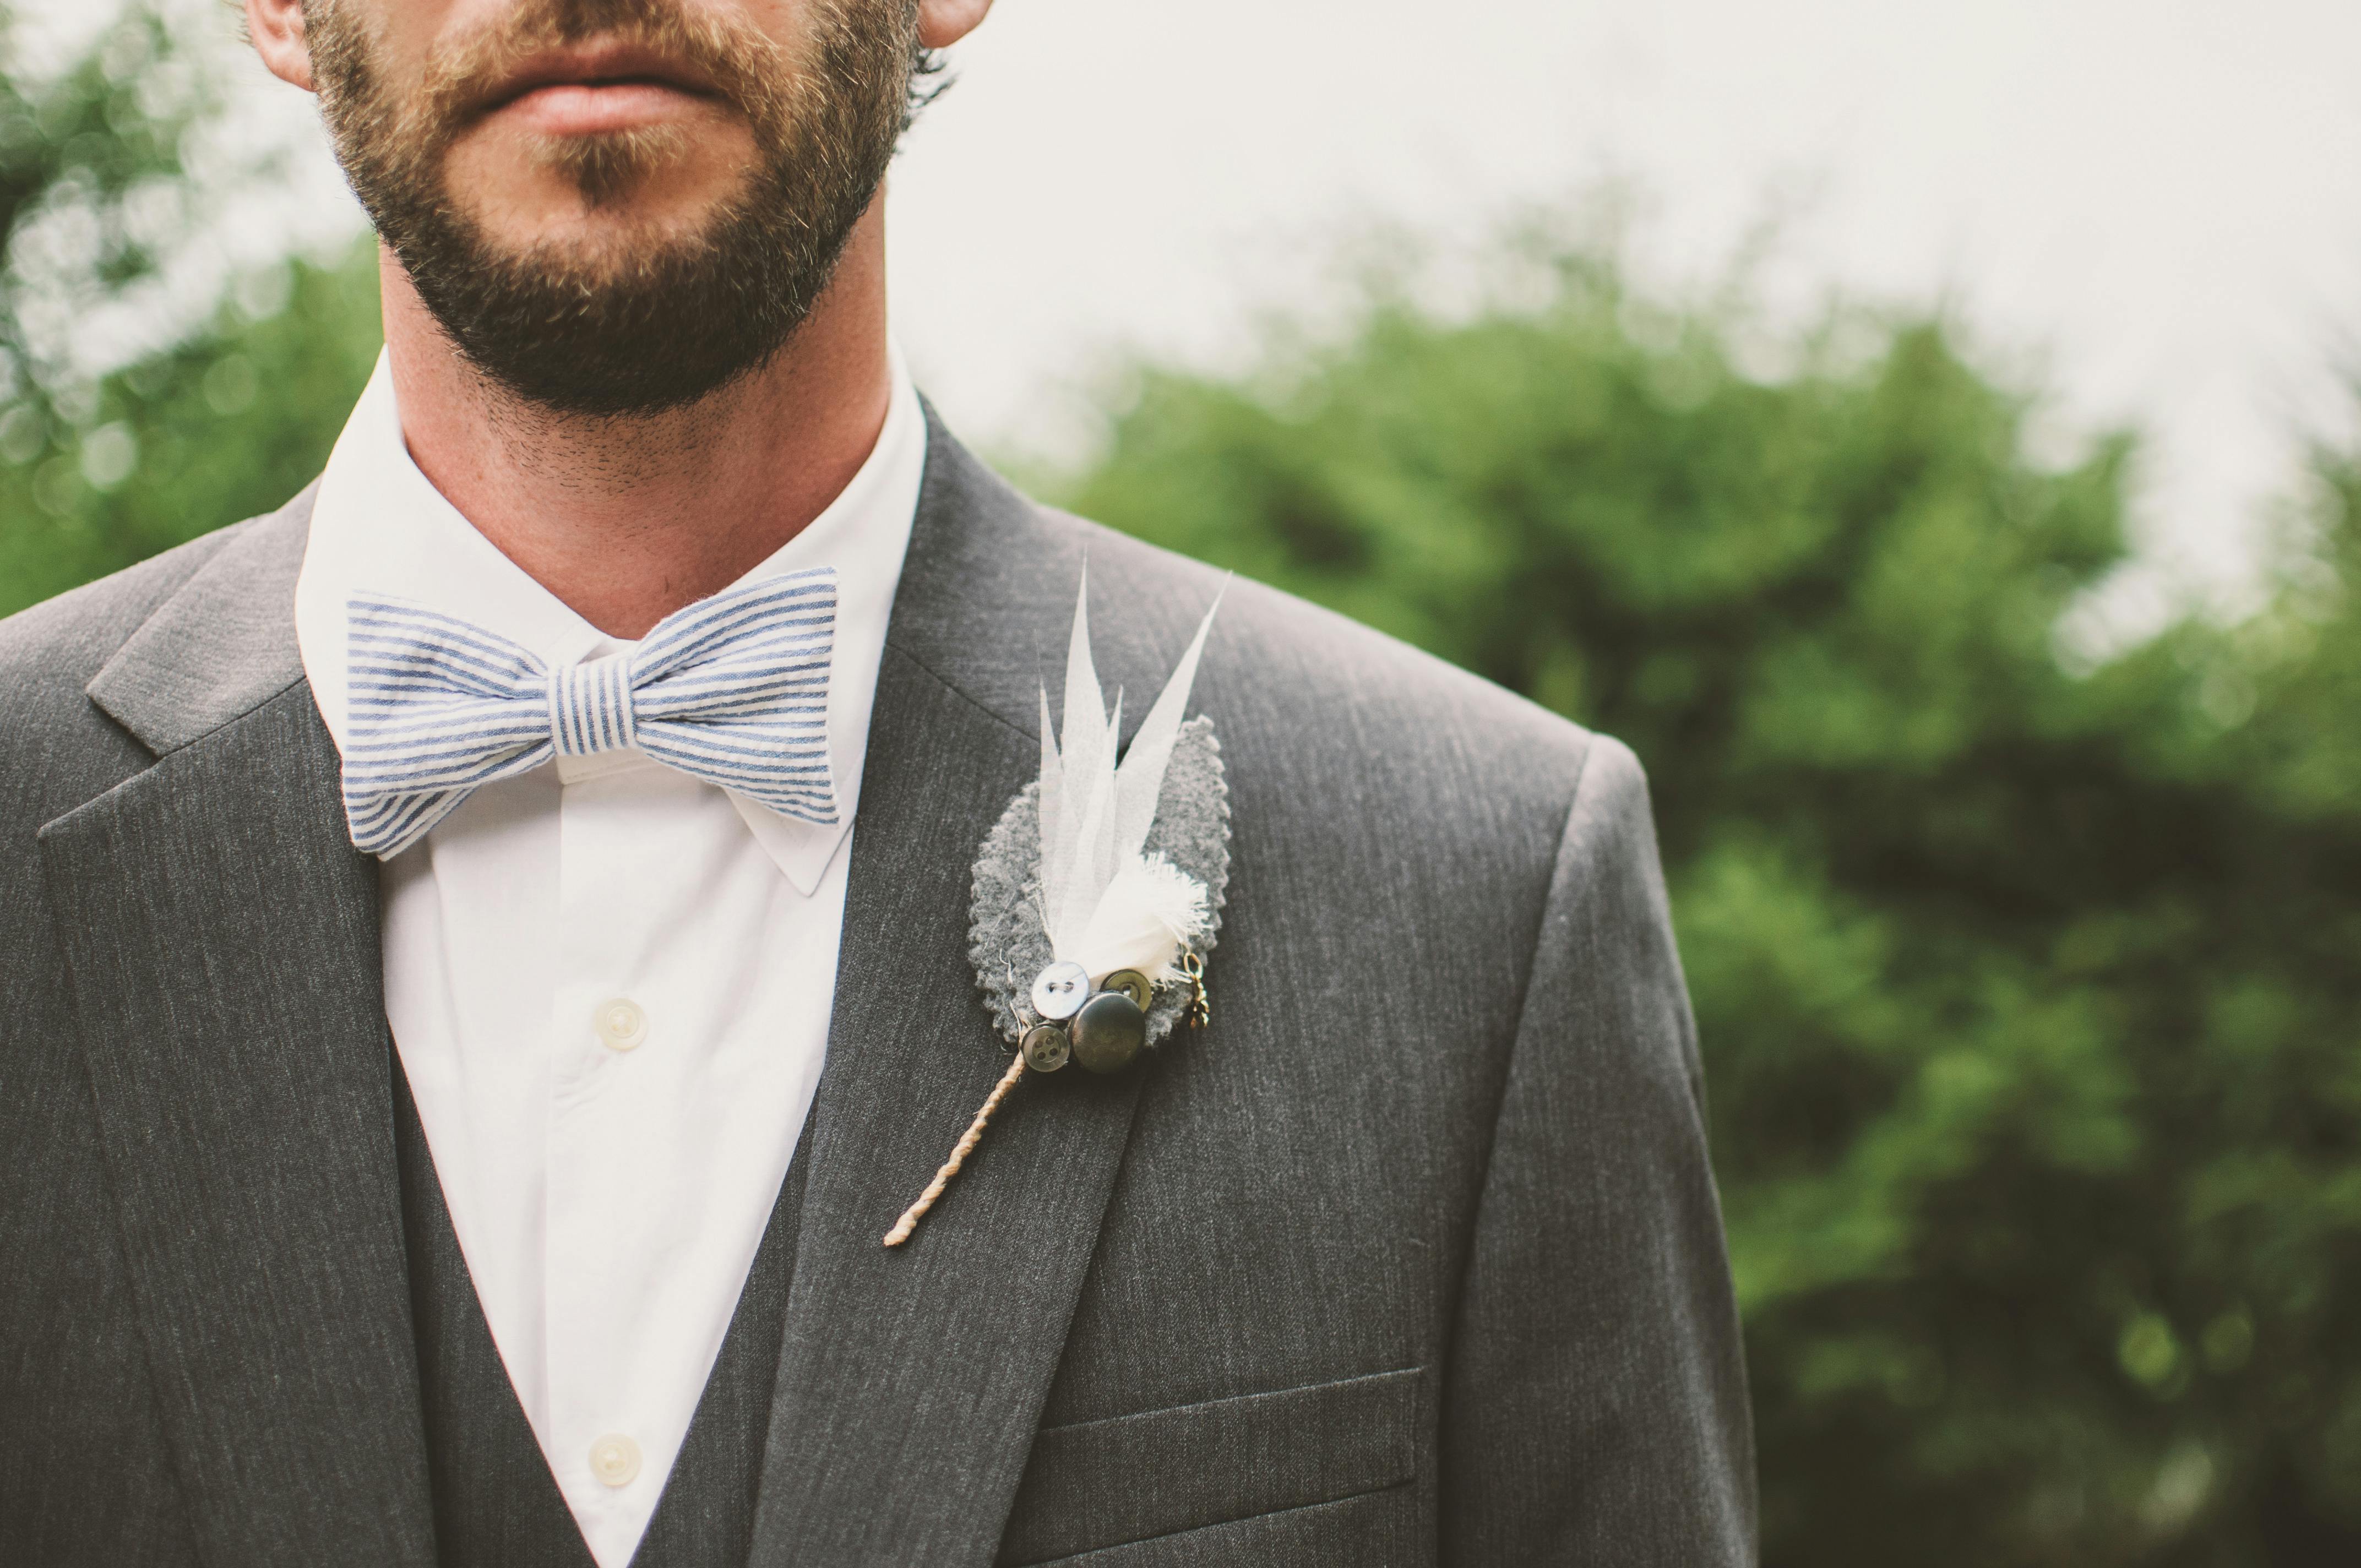 A groom in a gray tux | Source: Pexels